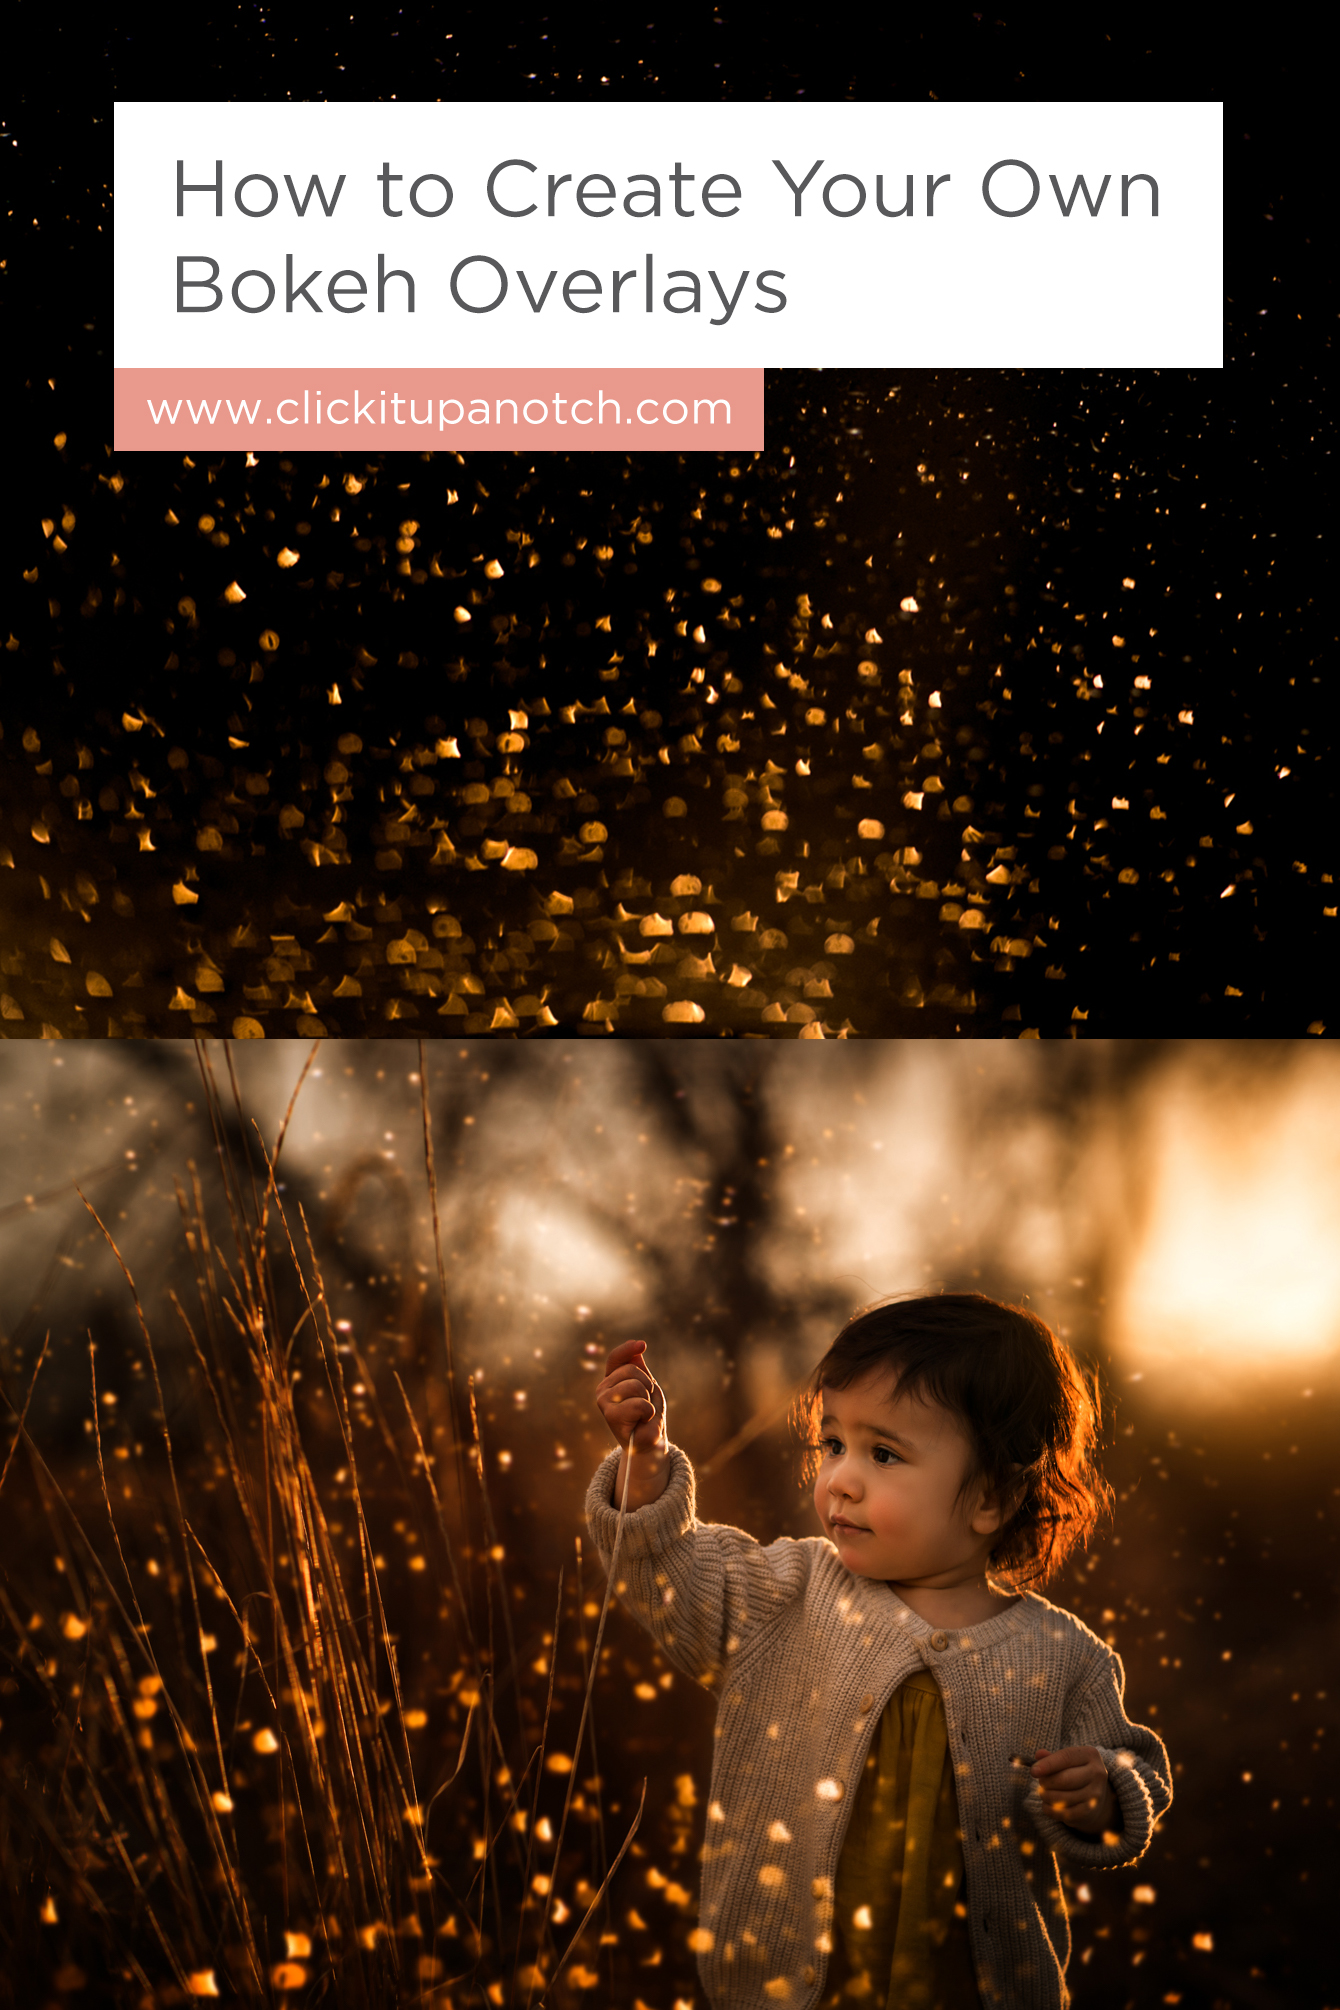 I've always wondered how photographers created their overlays! Read - "How to Create Your Own Bokeh Overlays"